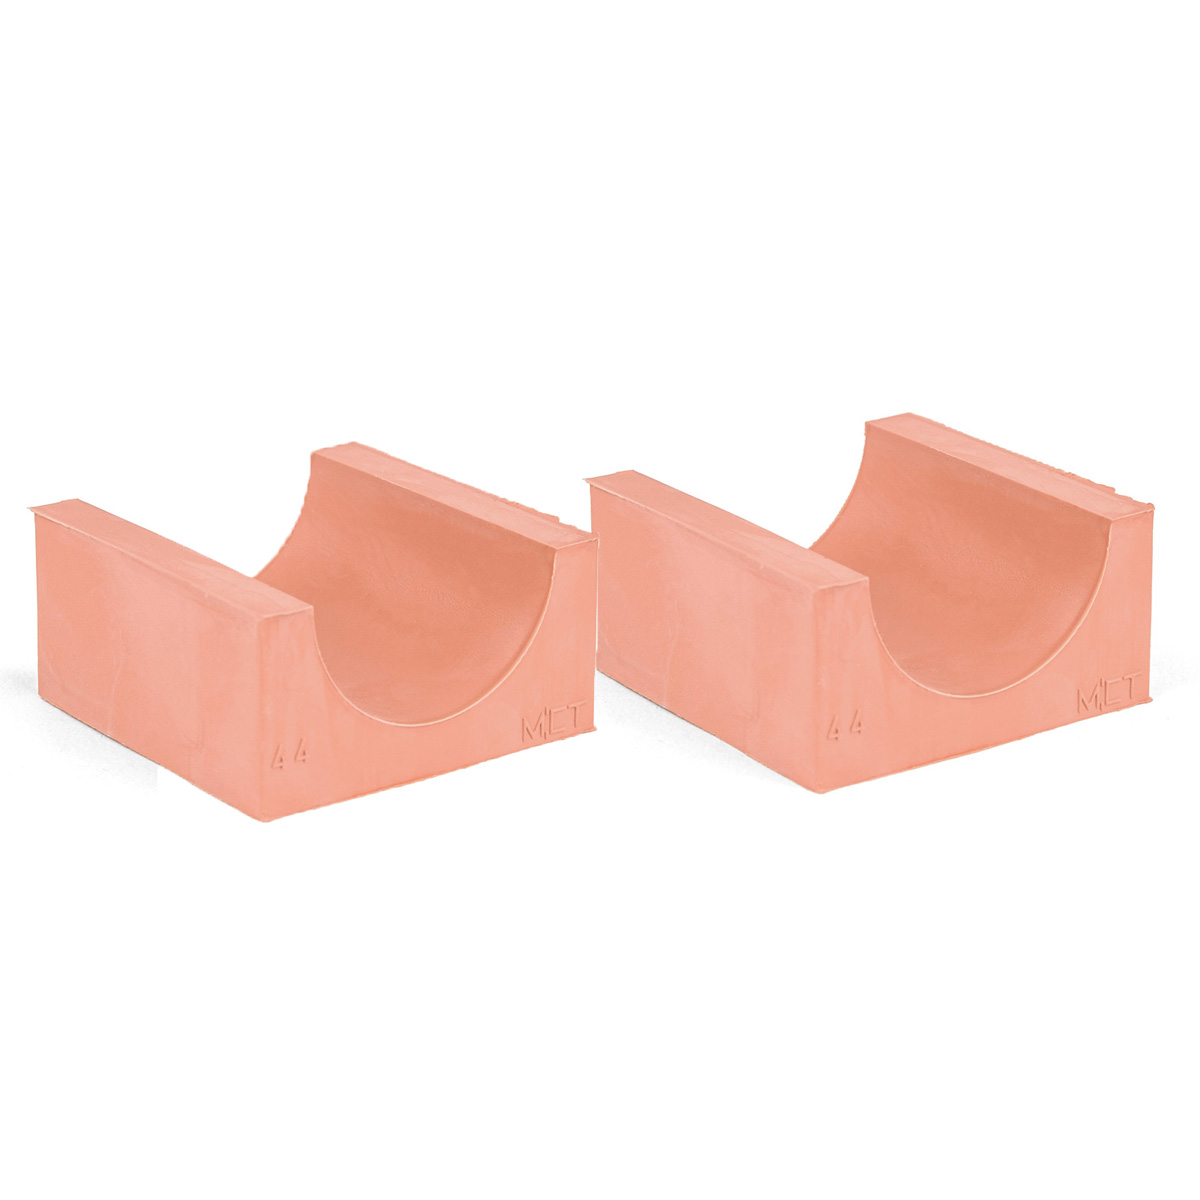 60-44*2 Set of 2 half insert block lycron, 60-44 for cable/pipe diam. 43.5-45.5mm